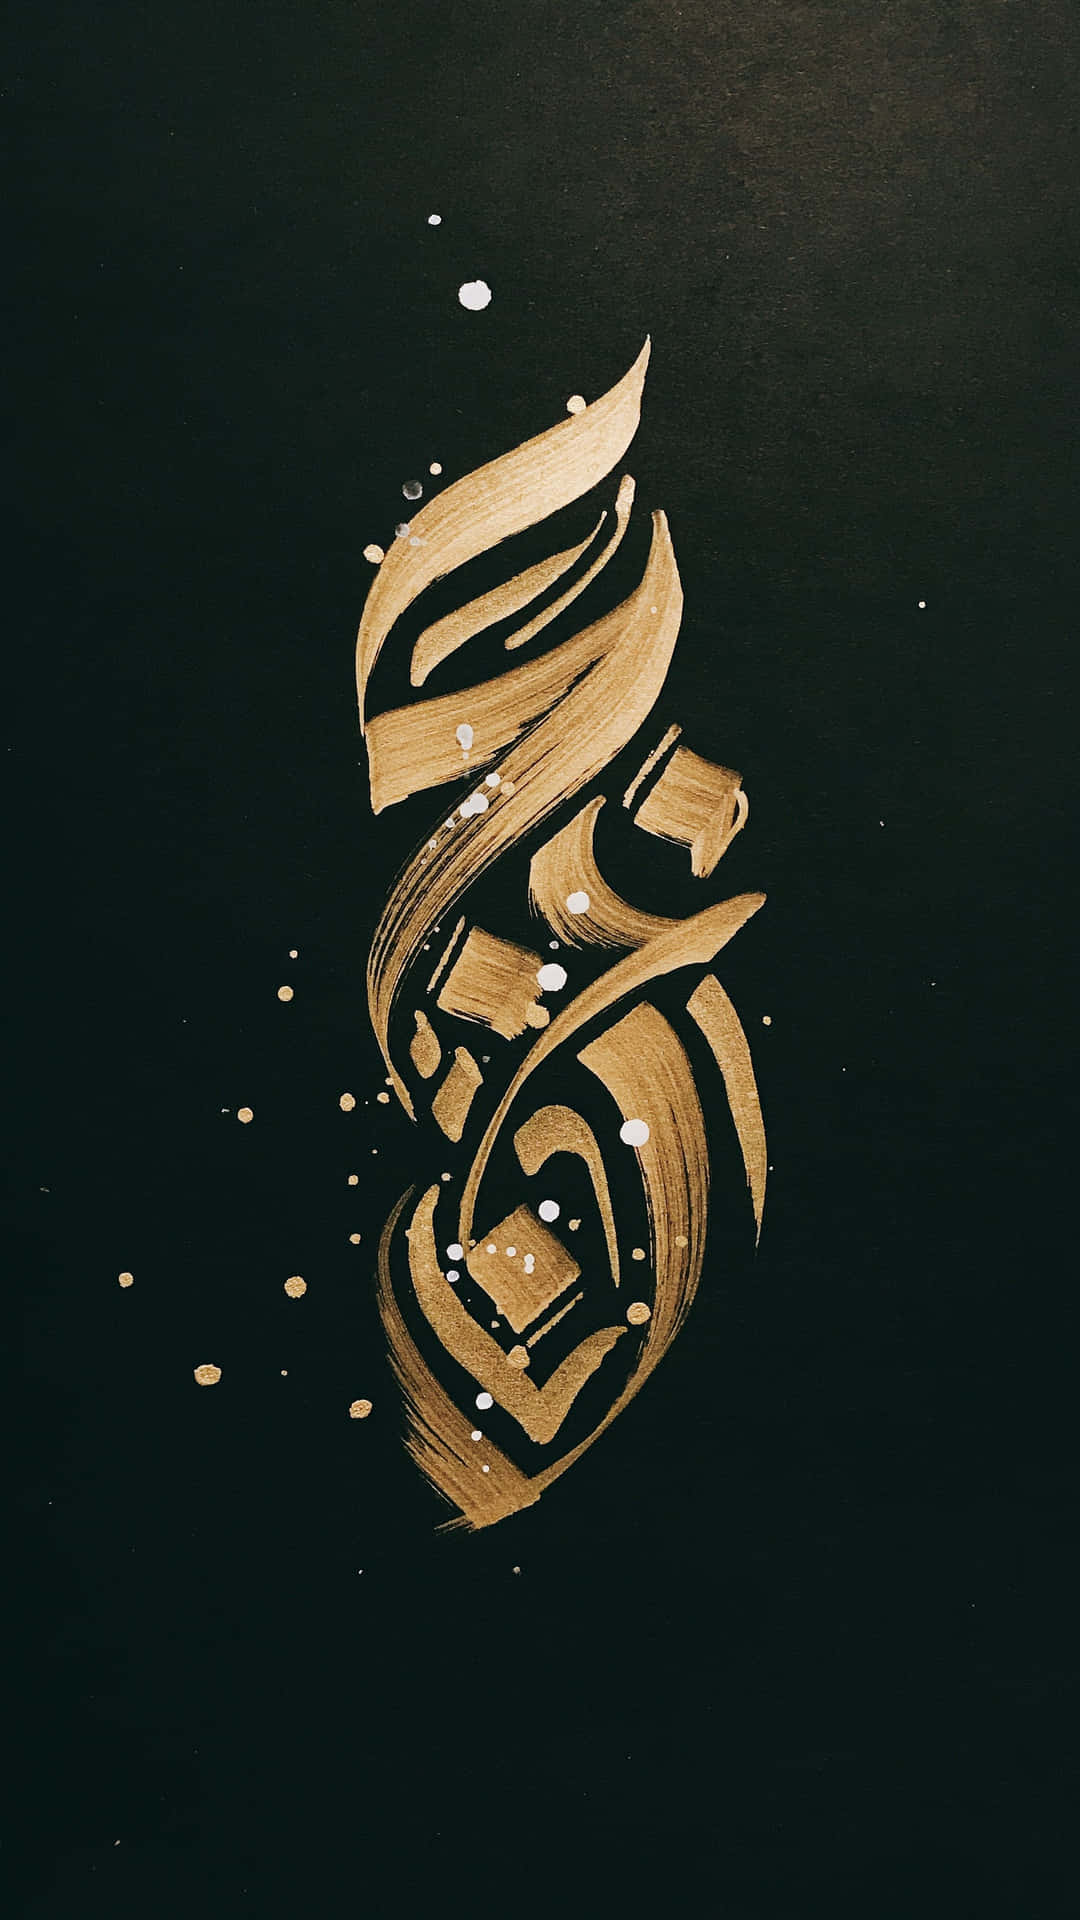 Arabic calligraphy depicting the phrase "Trust in God" Wallpaper